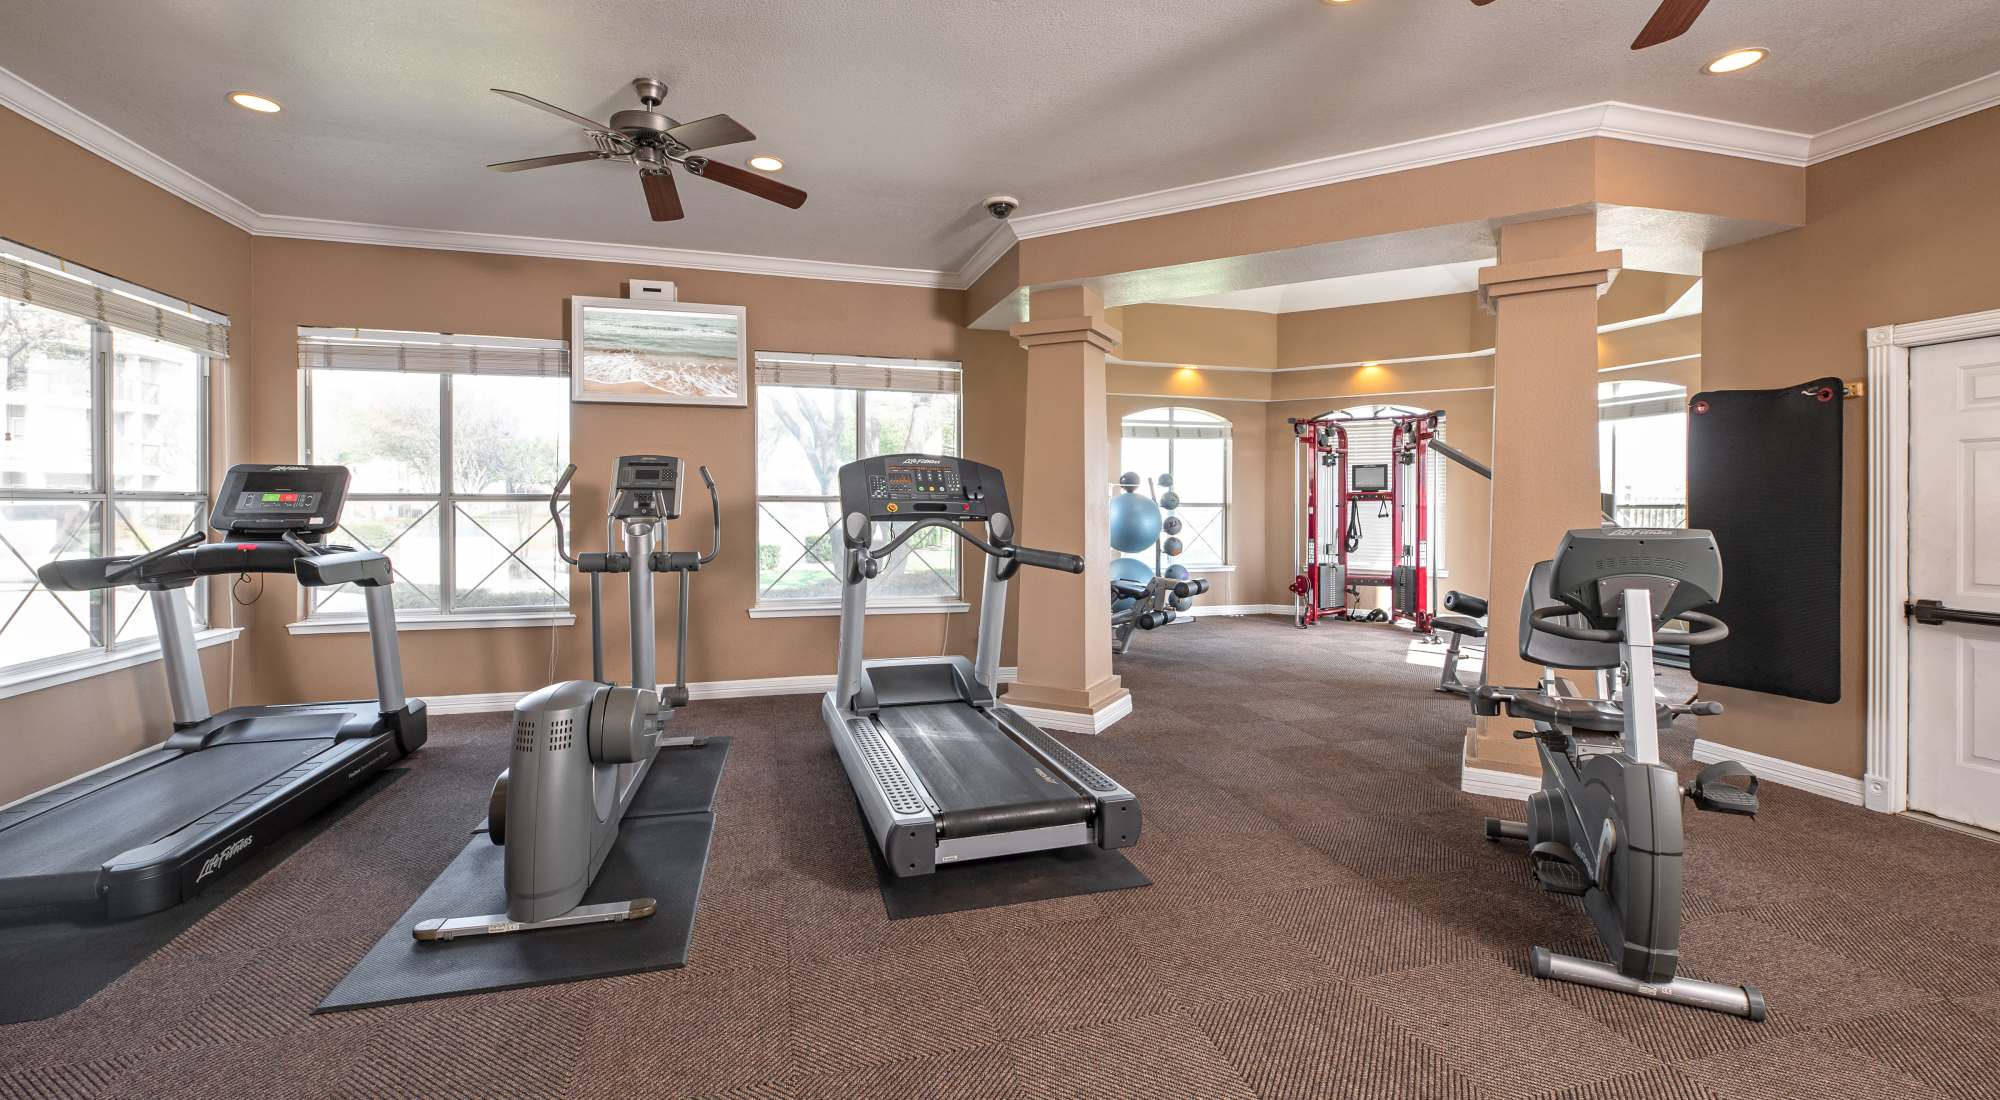 Fitness center at Crescent Cove at Lakepointe in Lewisville, Texas